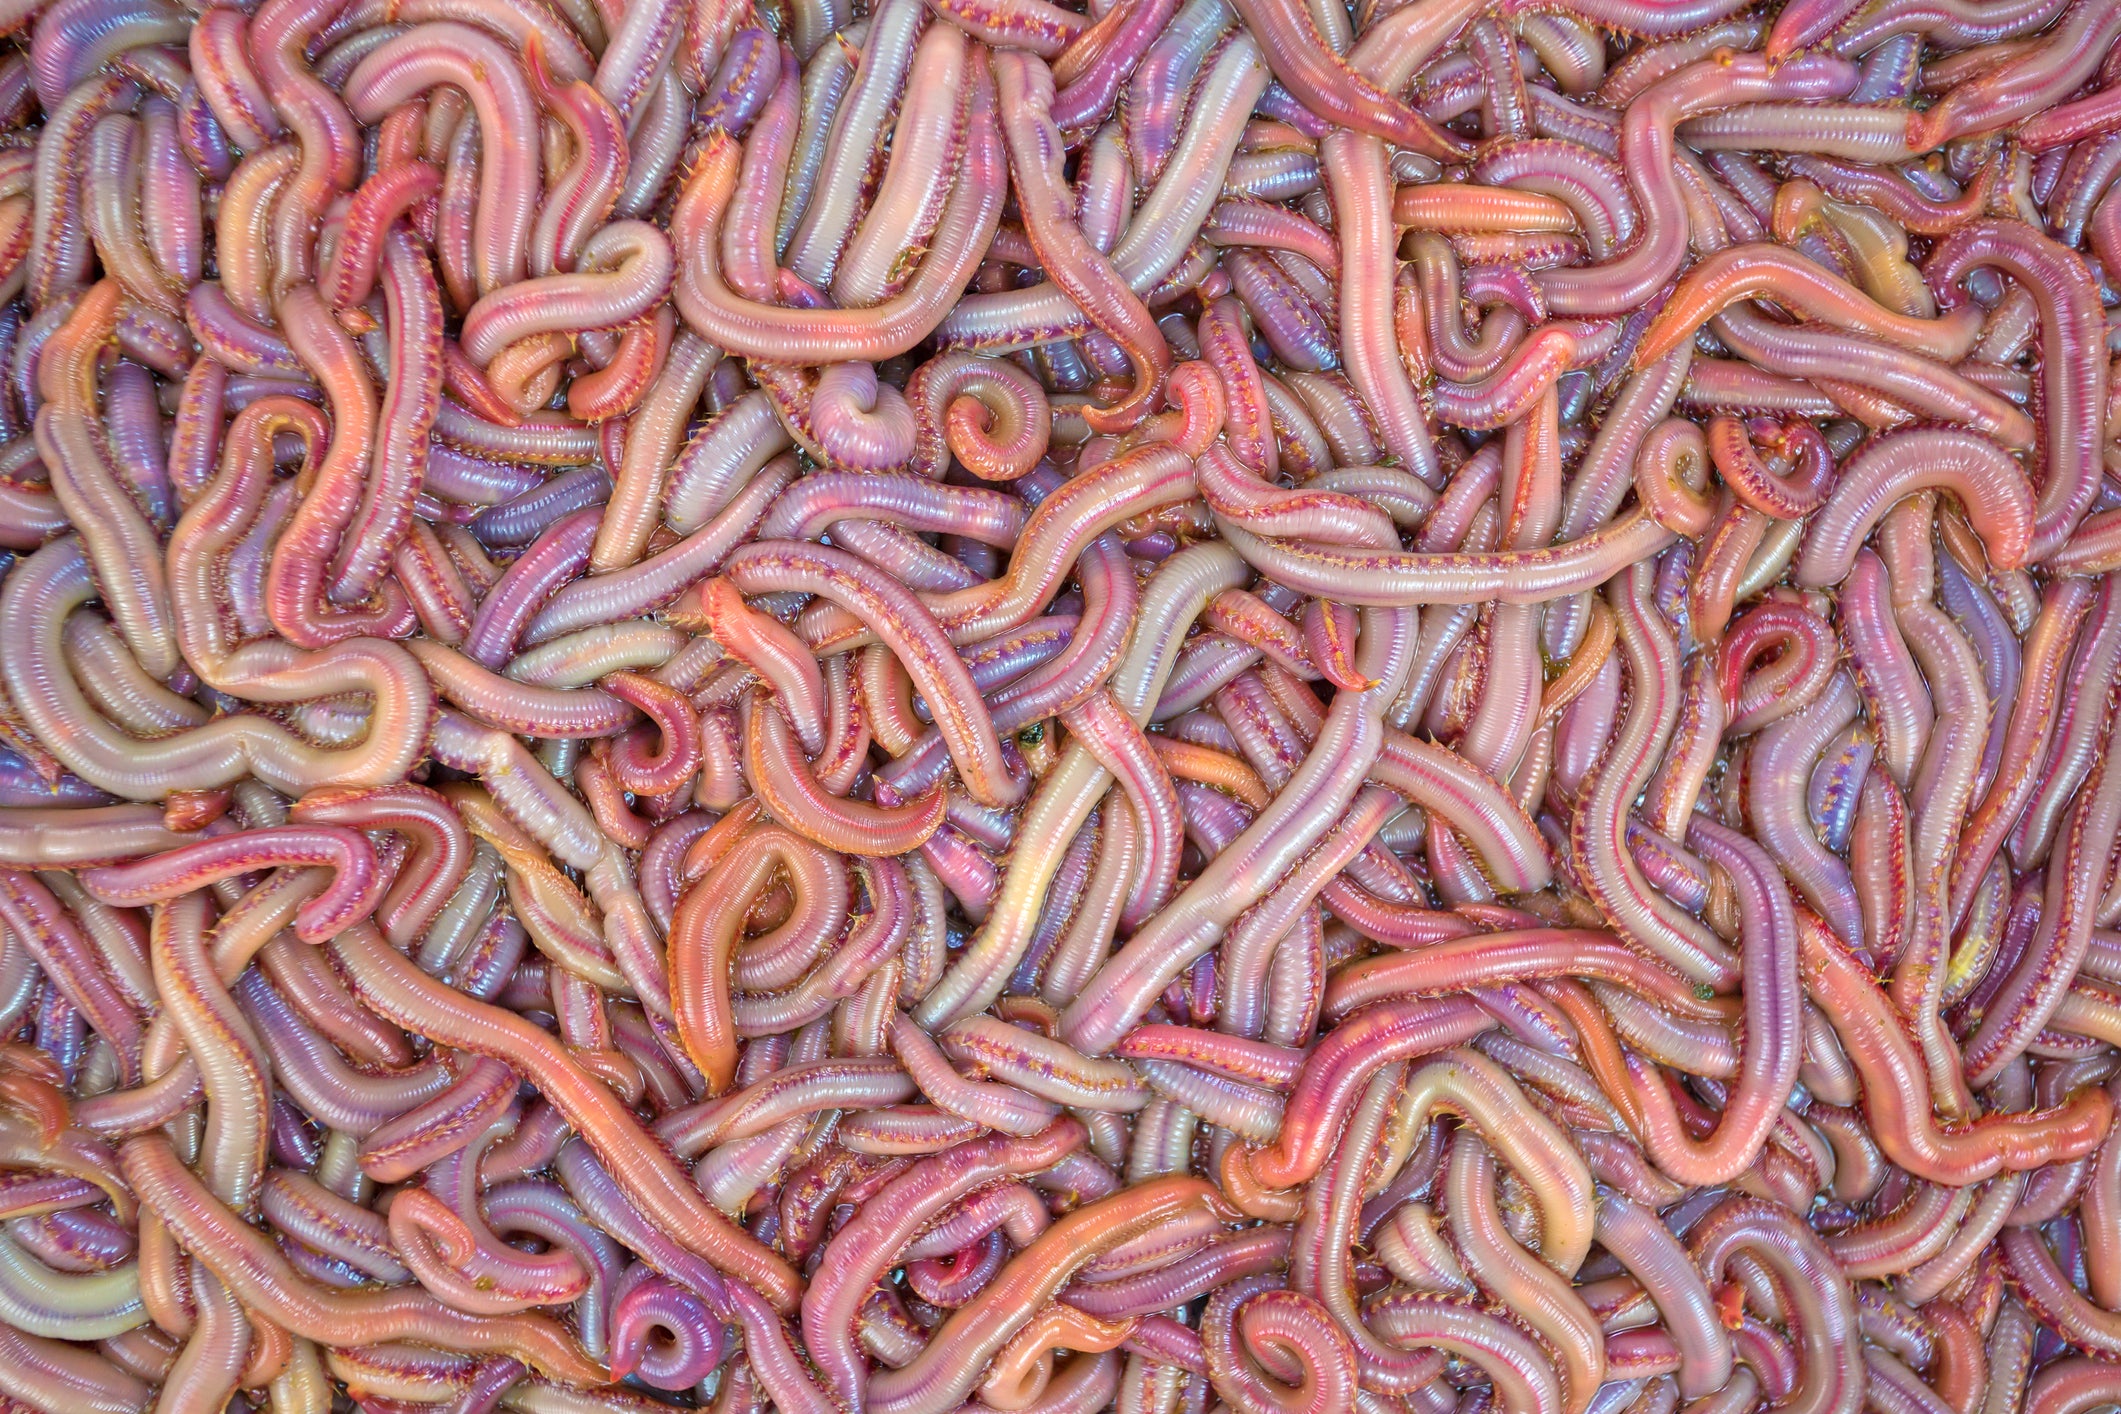 Swap Shop - We have bloodworms!!! #stripperlife #fishing #njfishing #nj  #newjersey #southjersey #njboating #brooklawnstrong #bellmawr #westville  #gloustercity #bloodworms #bloodworm